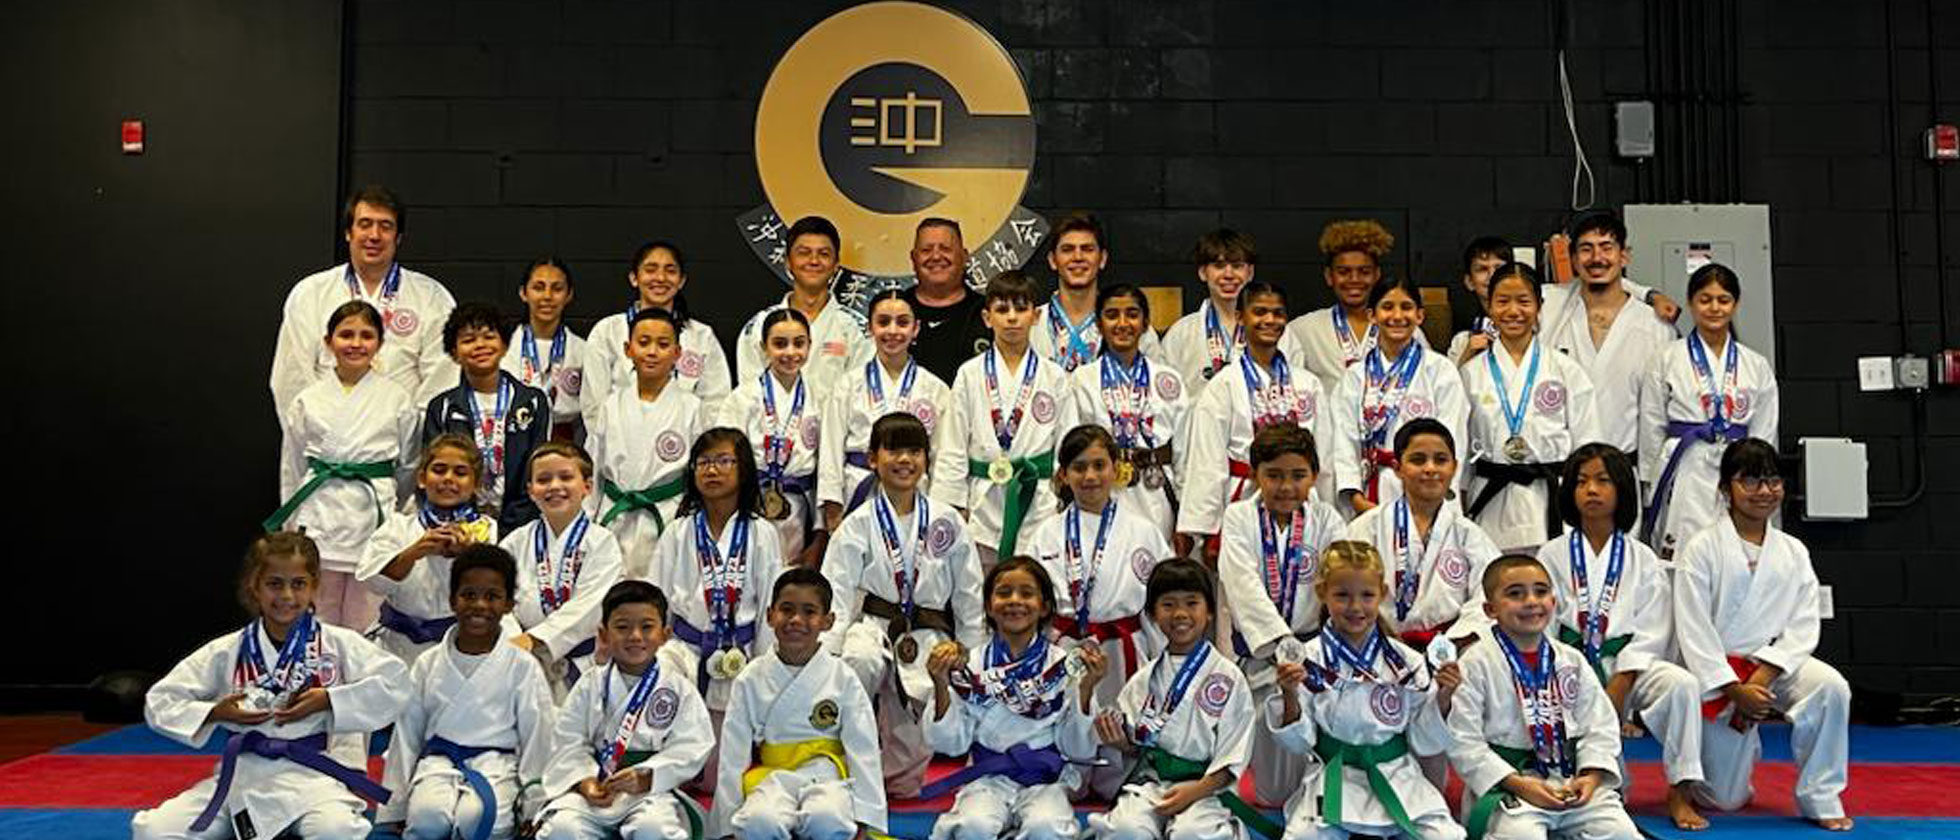 Why Stoneybrook Karate Is Ranked One of The Best Schools for Martial Arts In Winter Garden